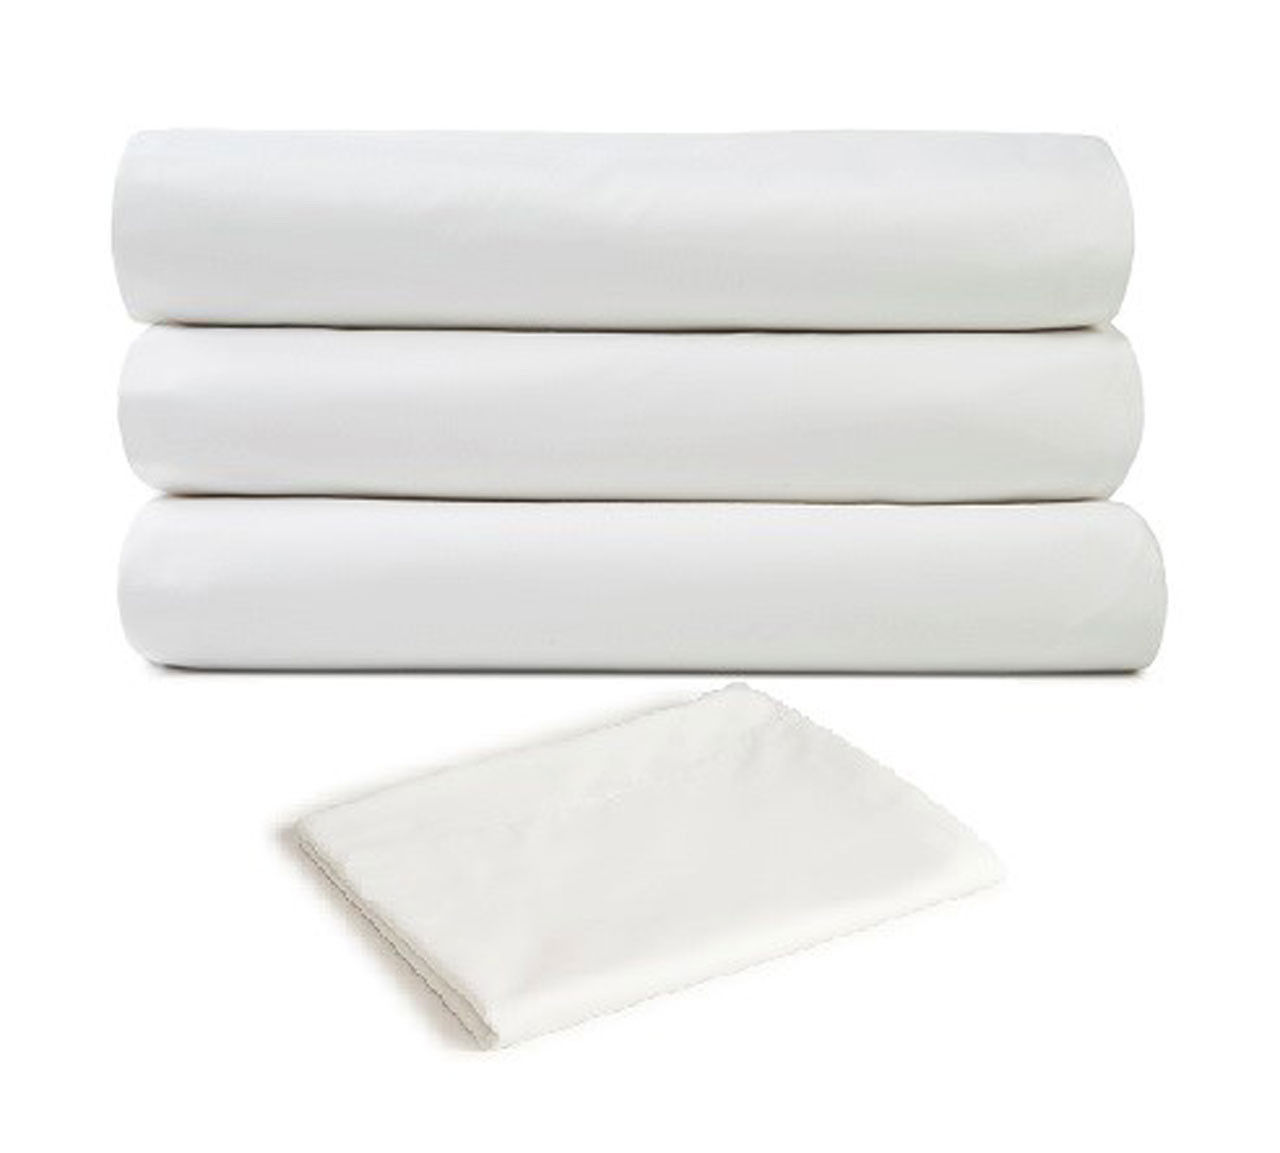 Do 100 polyester bed sheets resist wrinkling well?